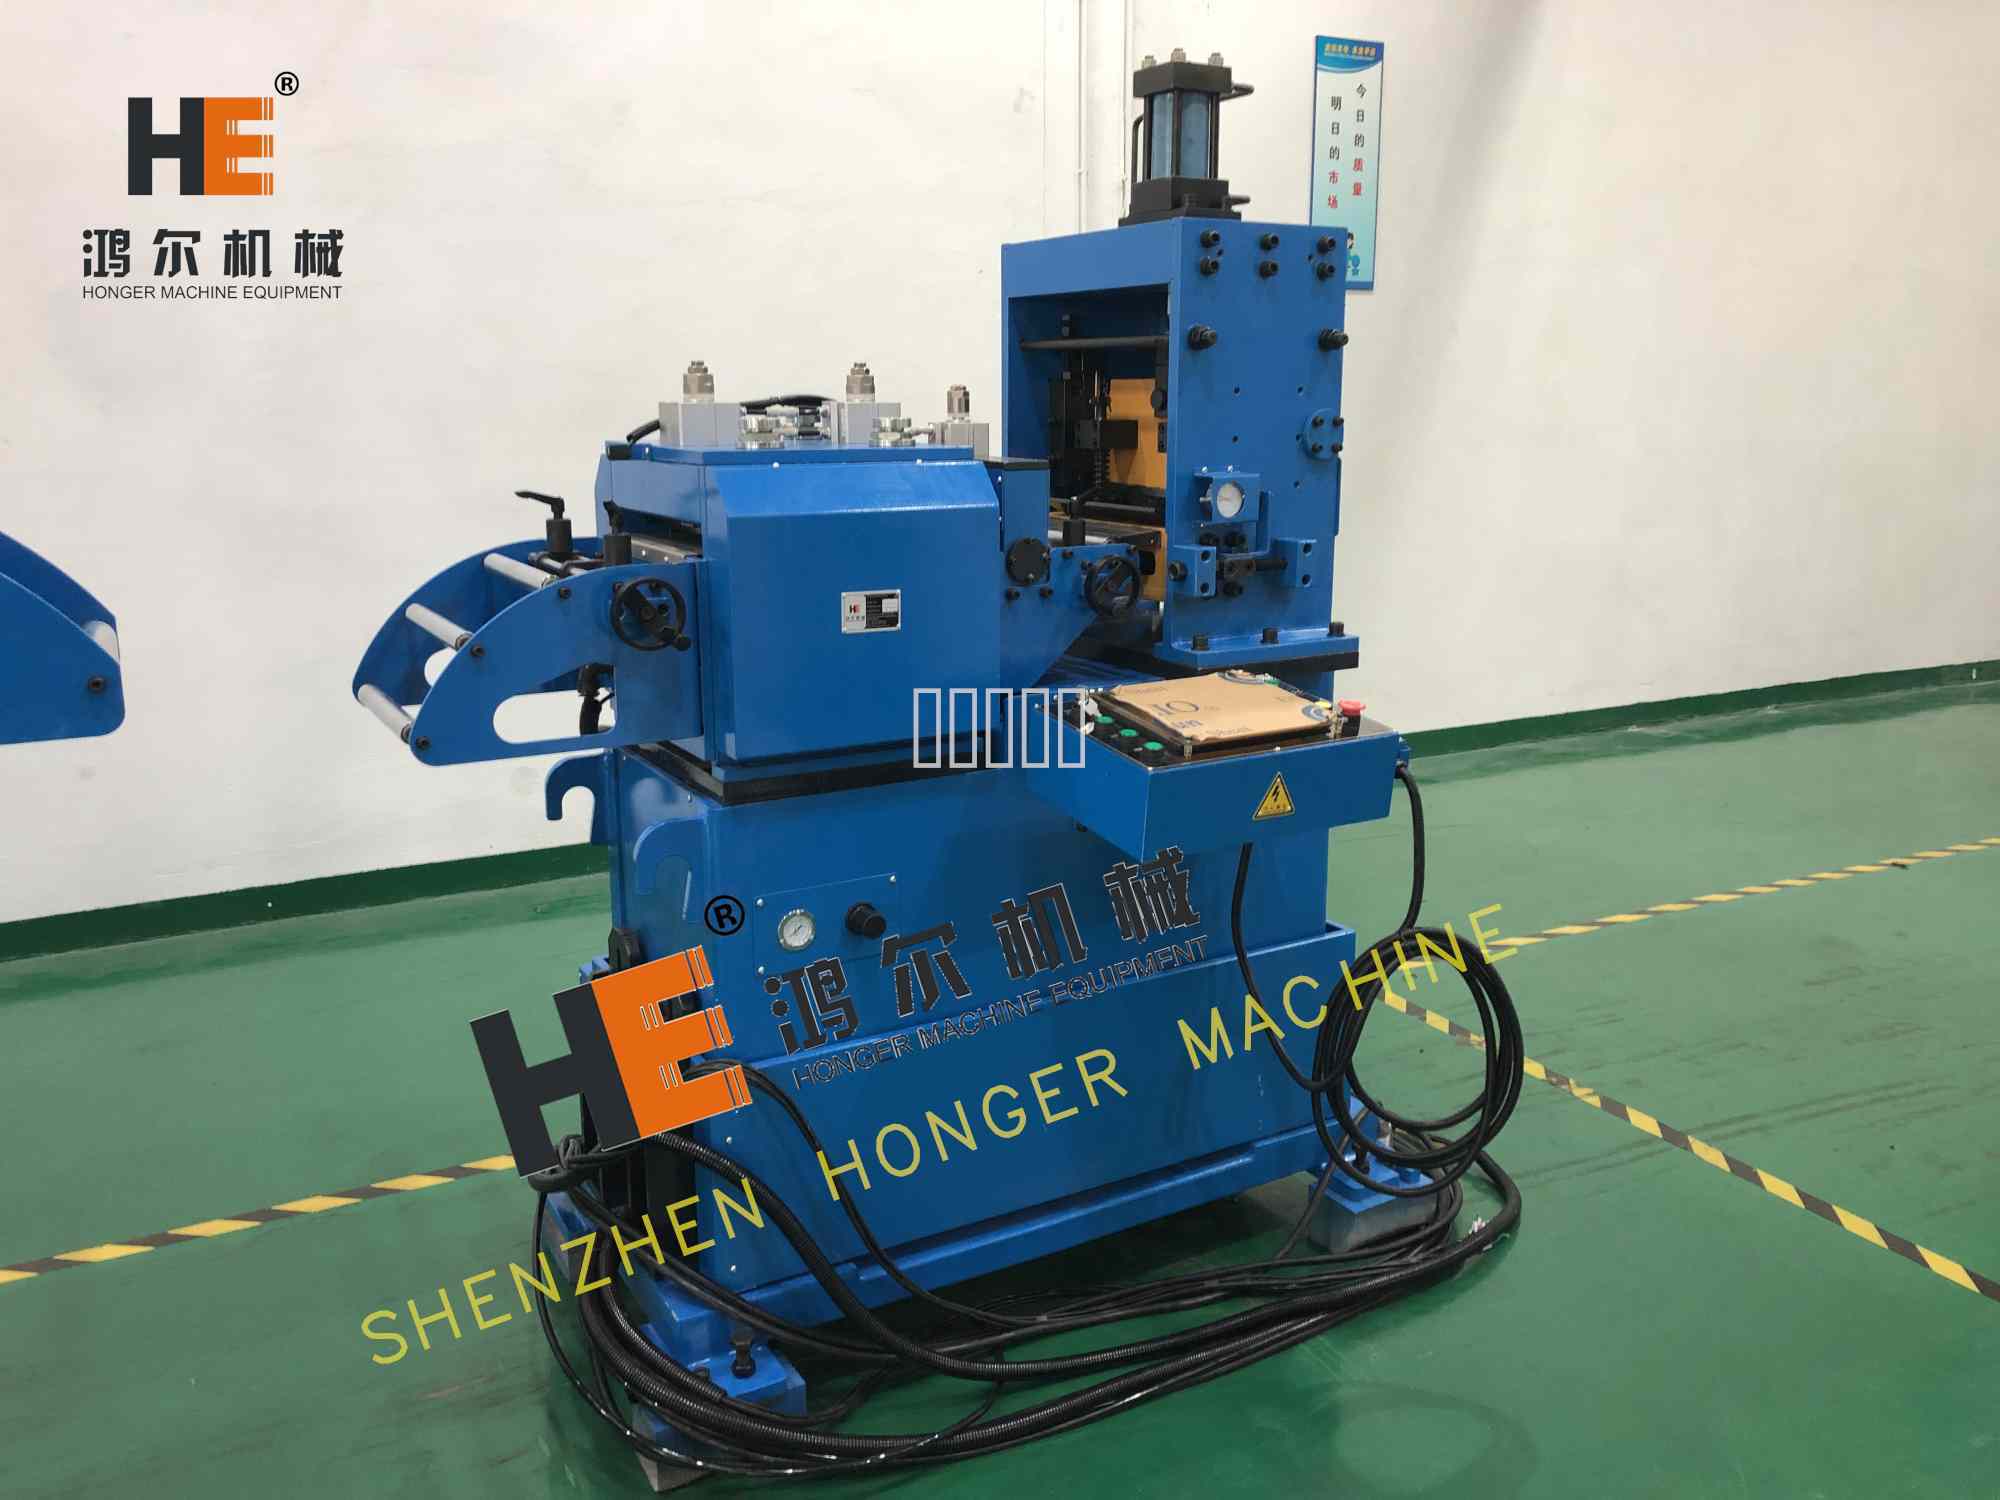 coil feeder machine with shearing for cutting